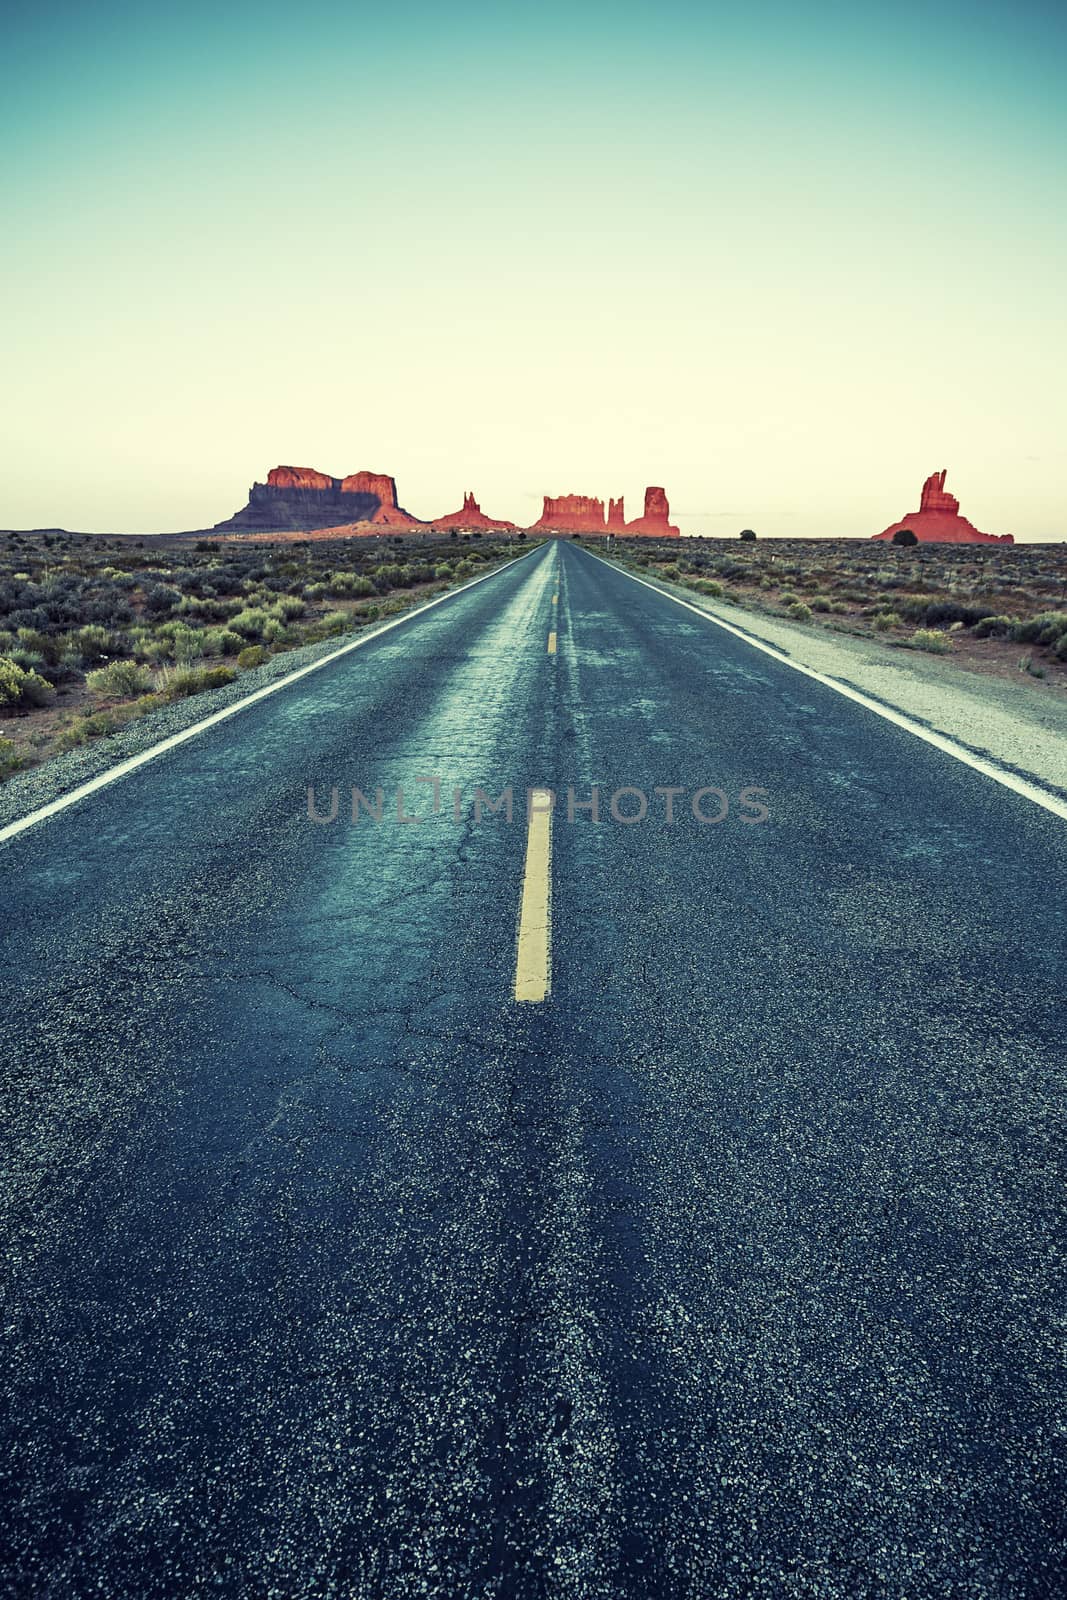 Road To Monument Valley by vwalakte